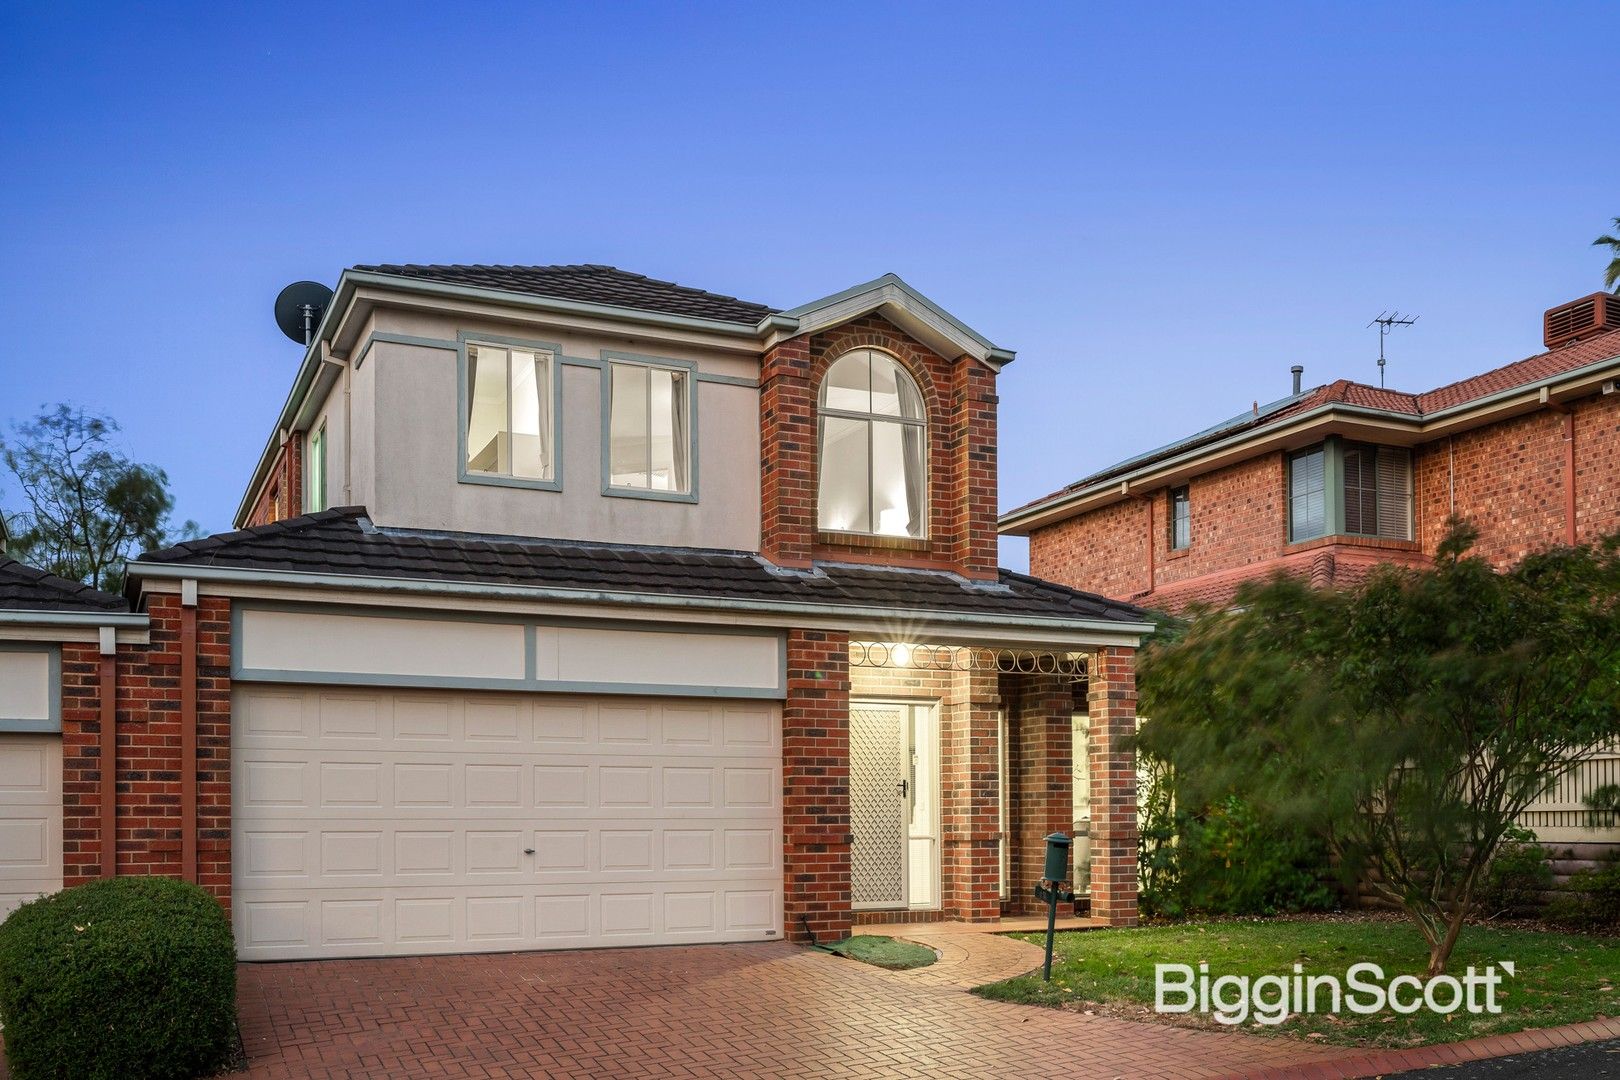 3 bedrooms House in 13 Cottinglea Terrace RINGWOOD NORTH VIC, 3134